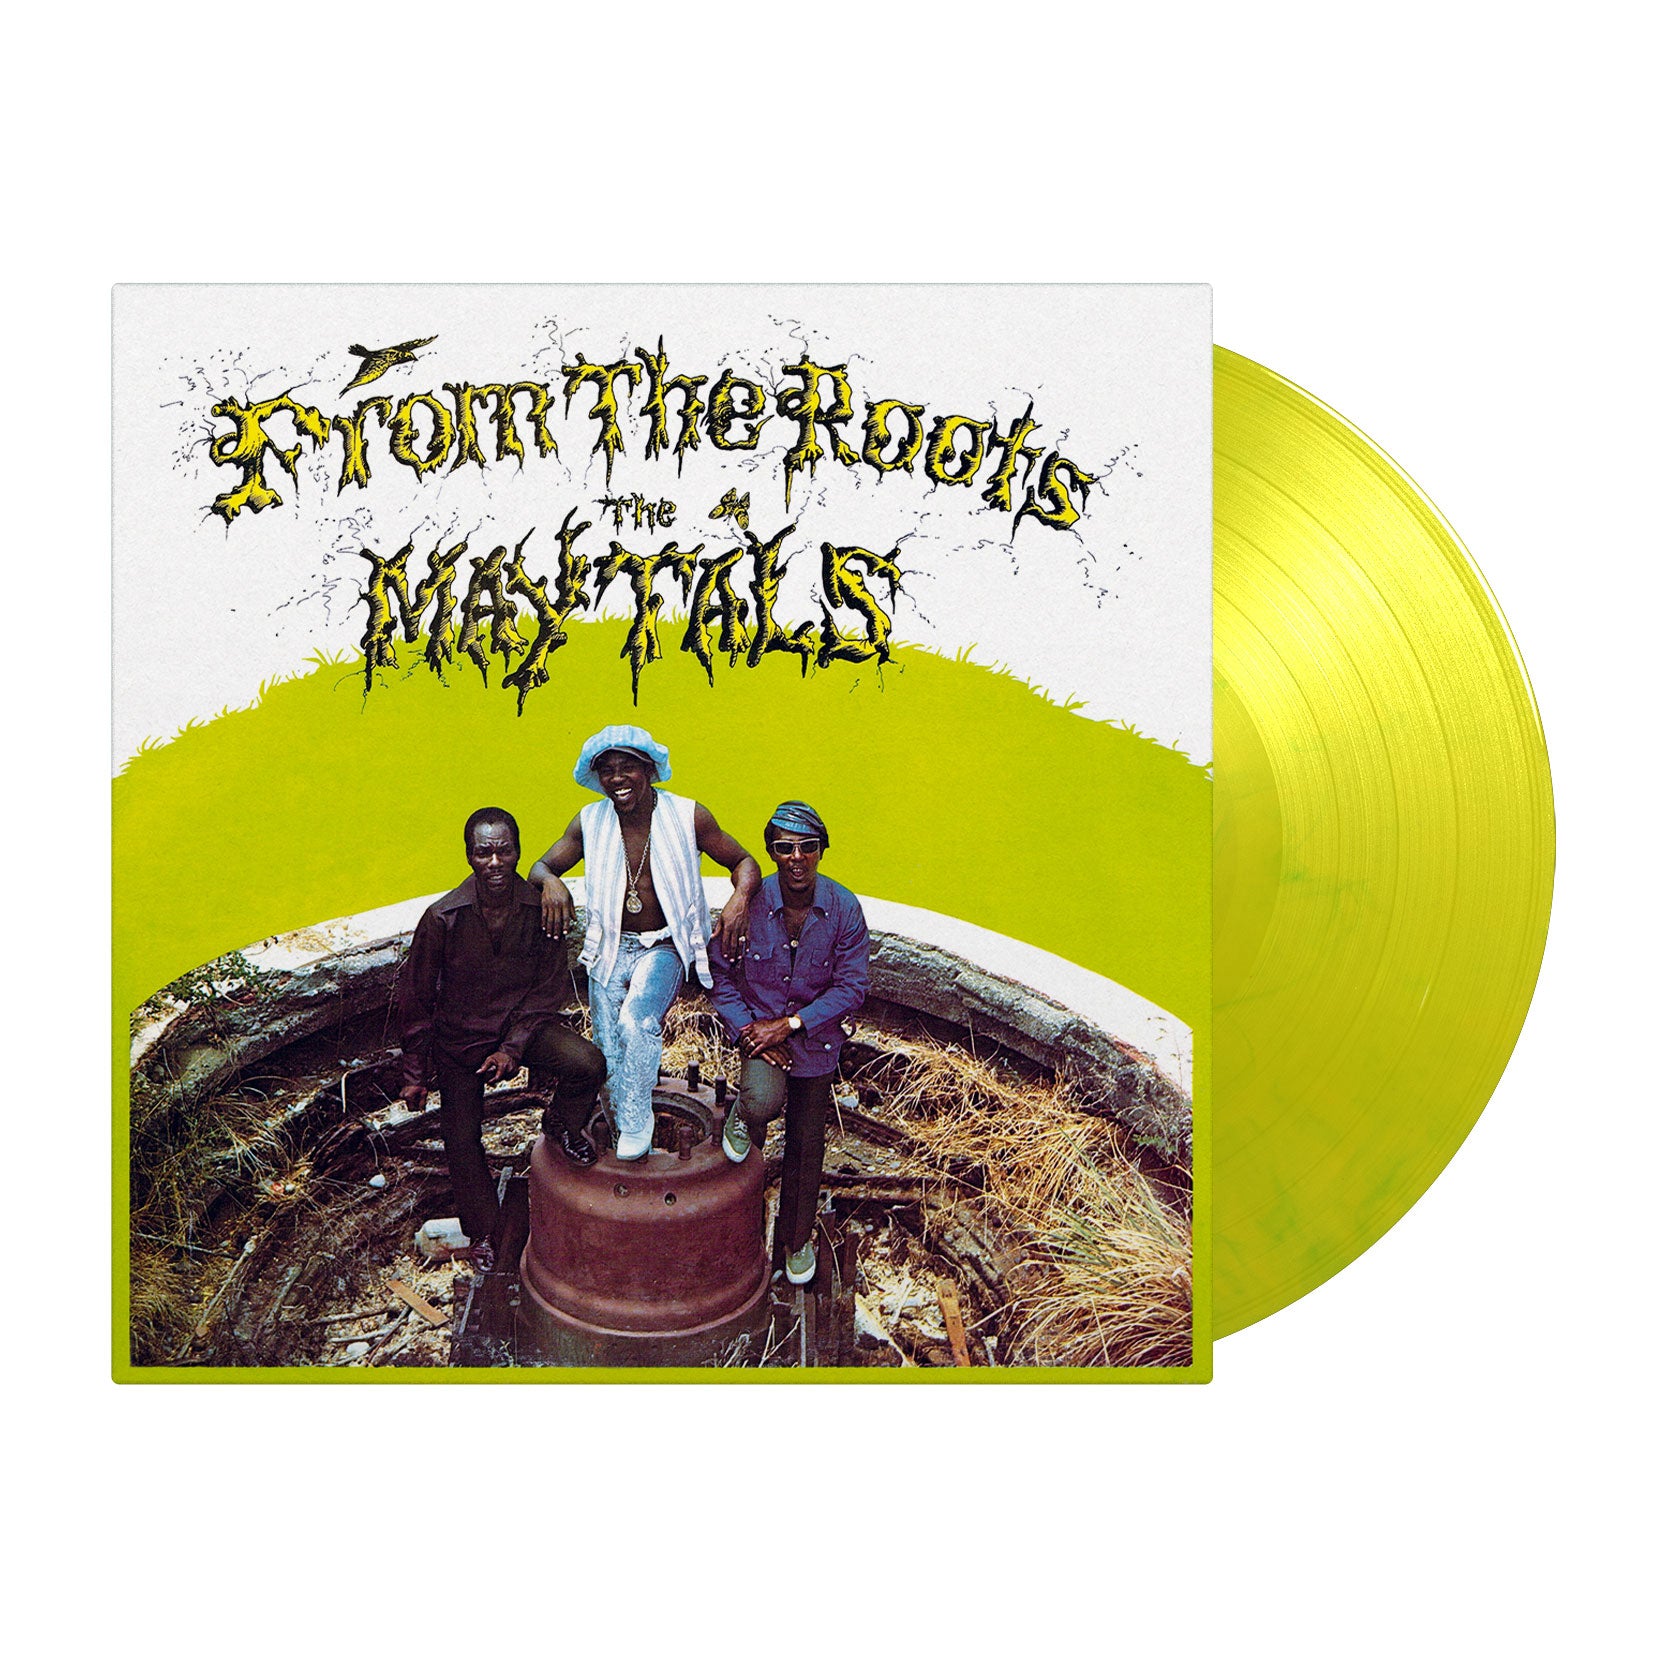 The Maytals - From The Roots: Limited Yellow & Transluscent Green Marbled Vinyl LP